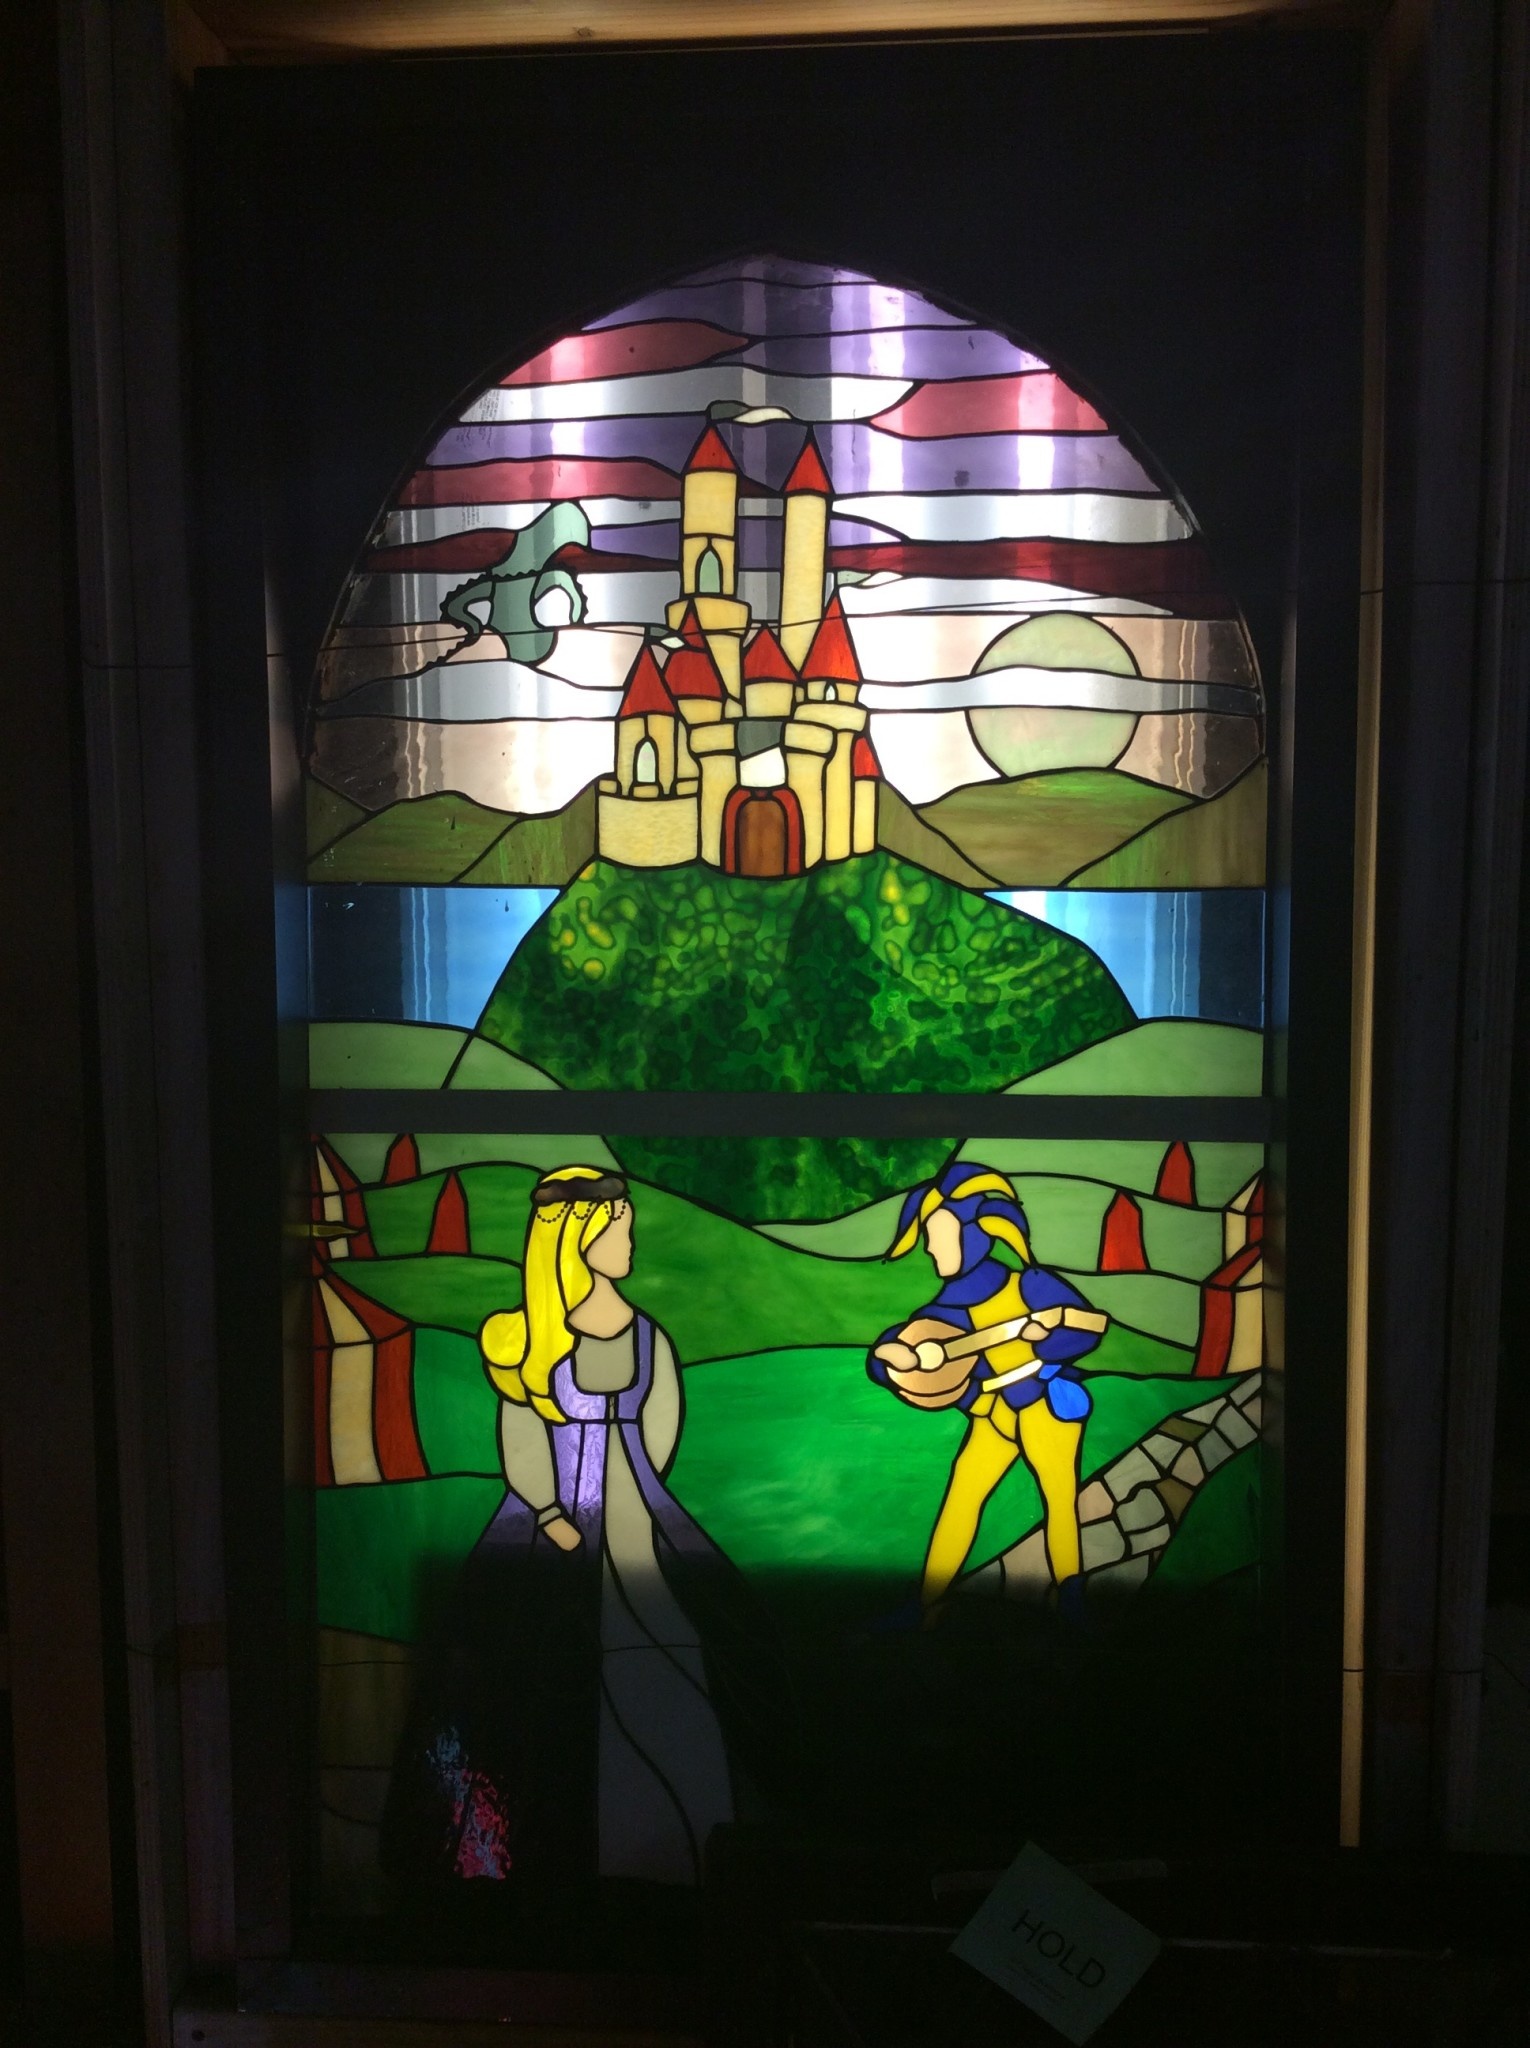 Stained glass jester and princess - Sarasota Architectural Salvage